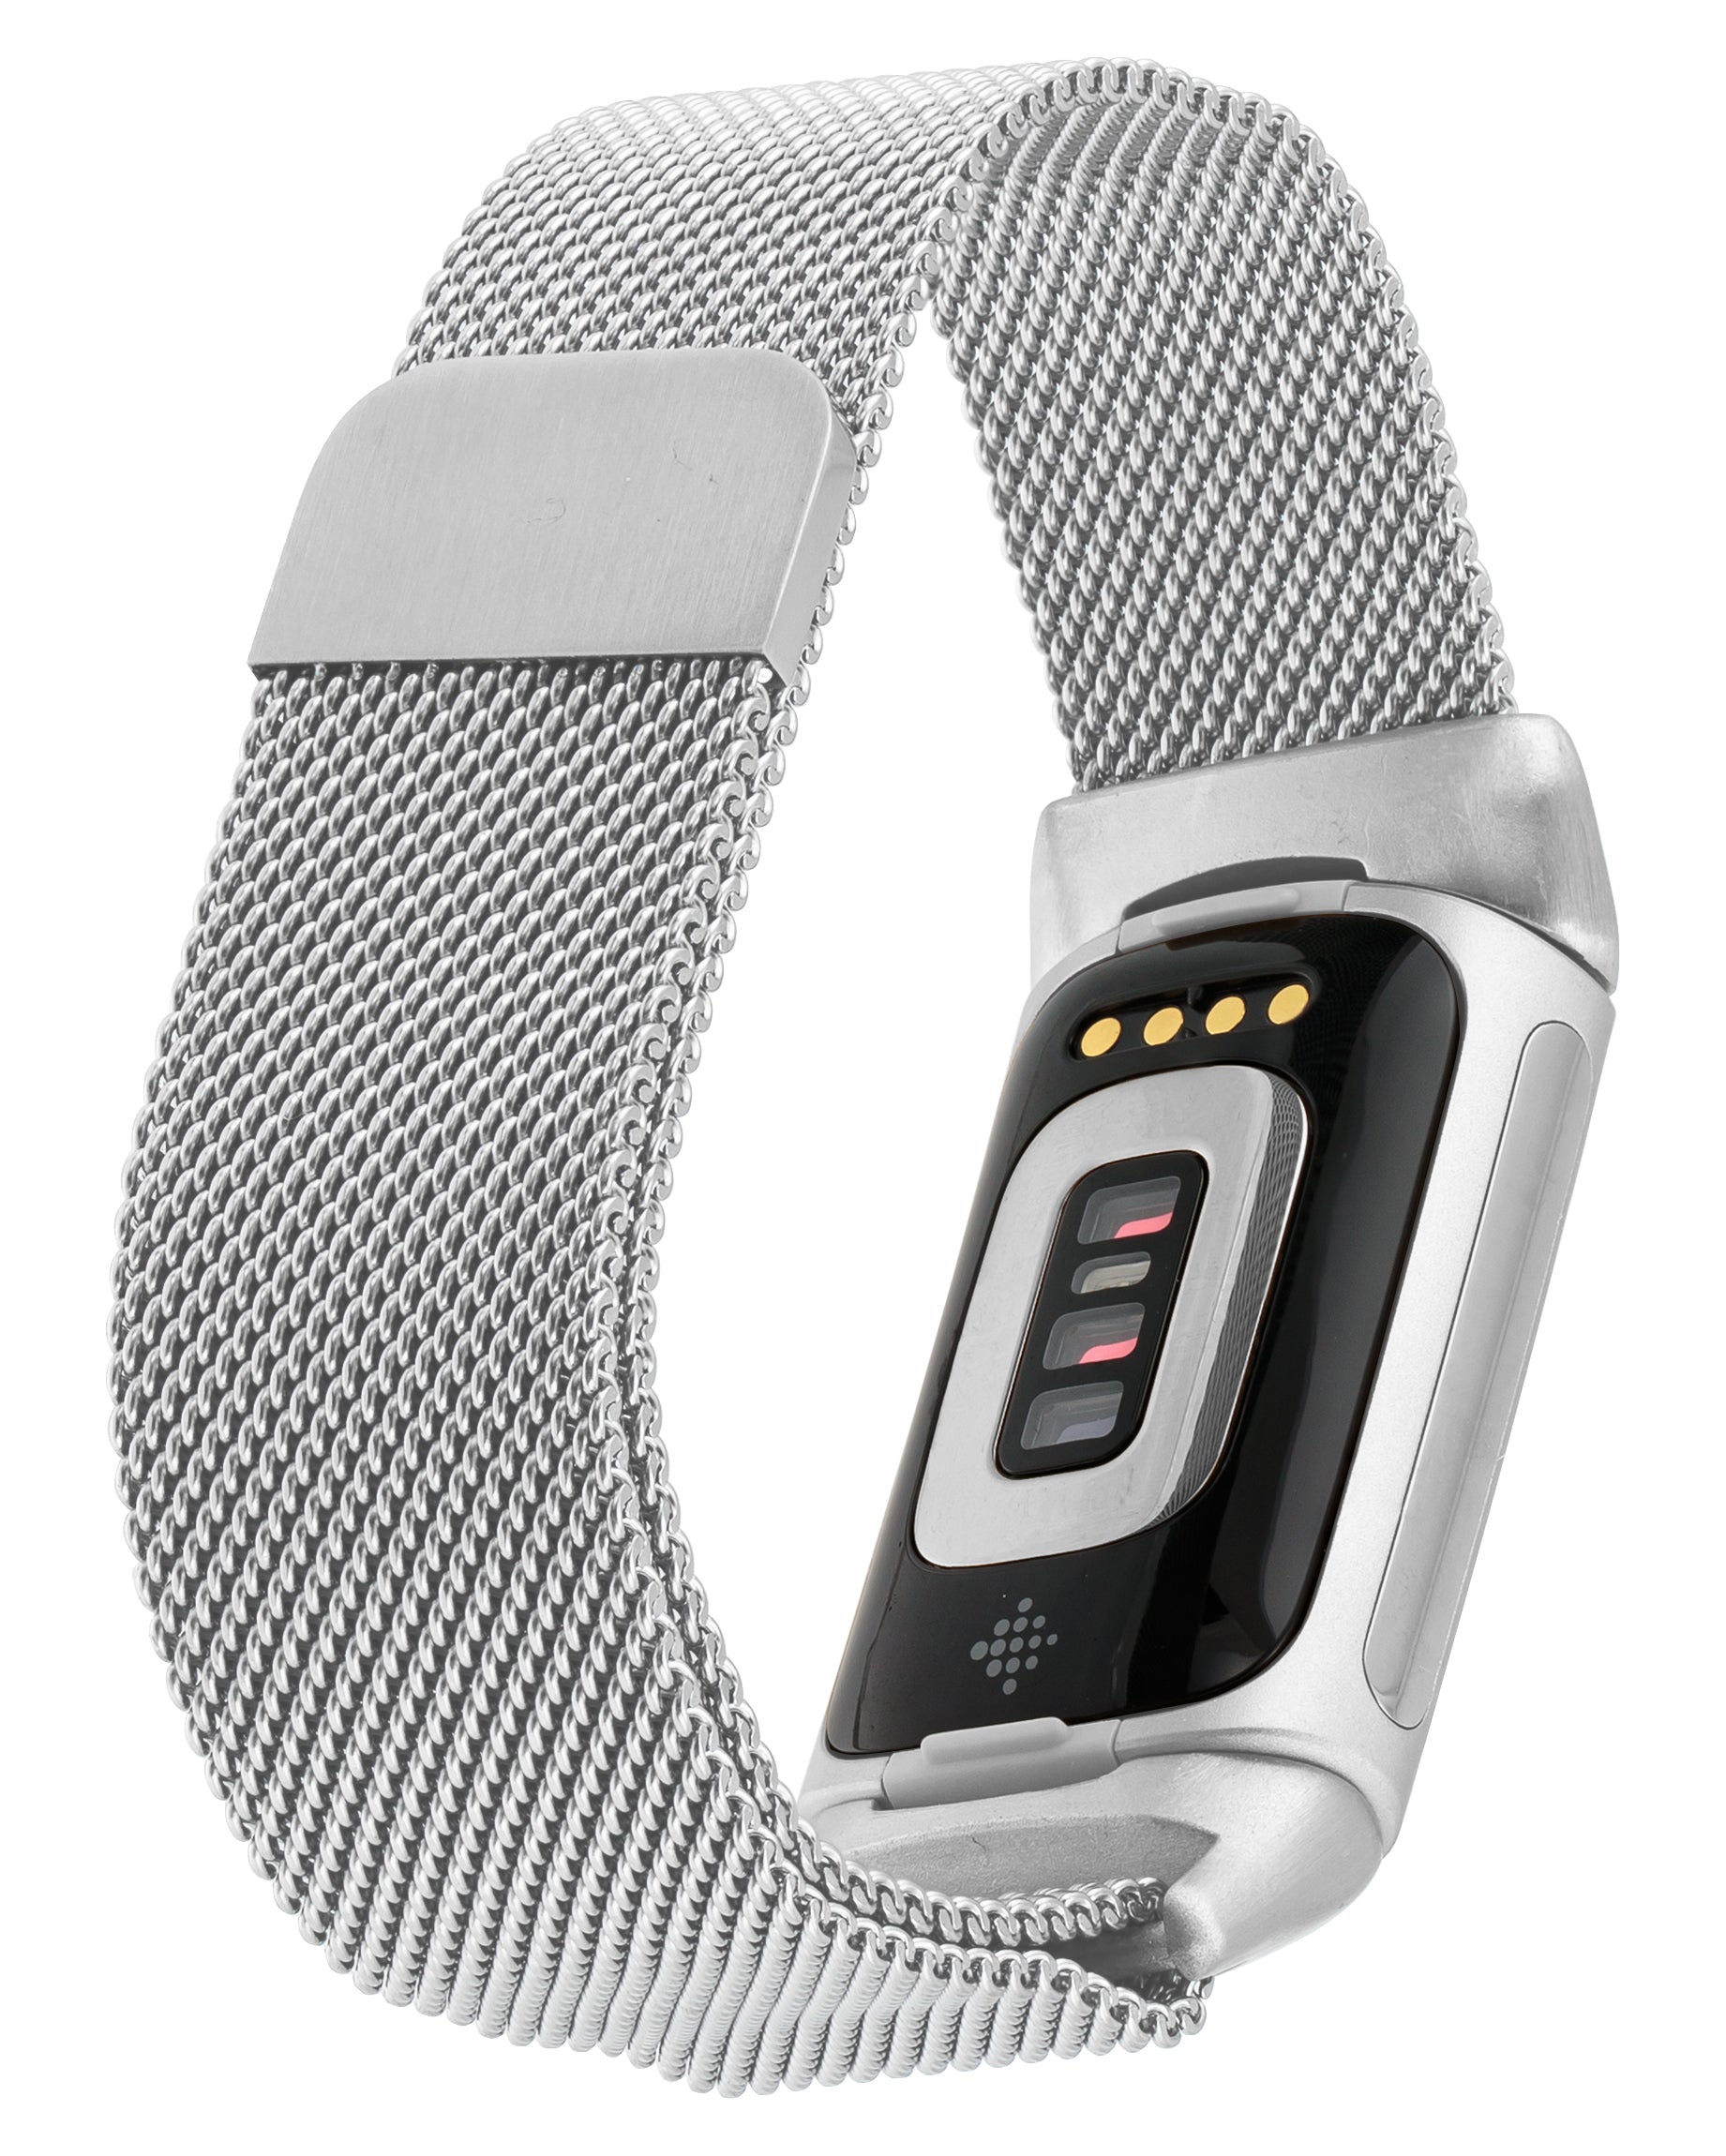 Stainless Steel Mesh Band for Fitbit Charge